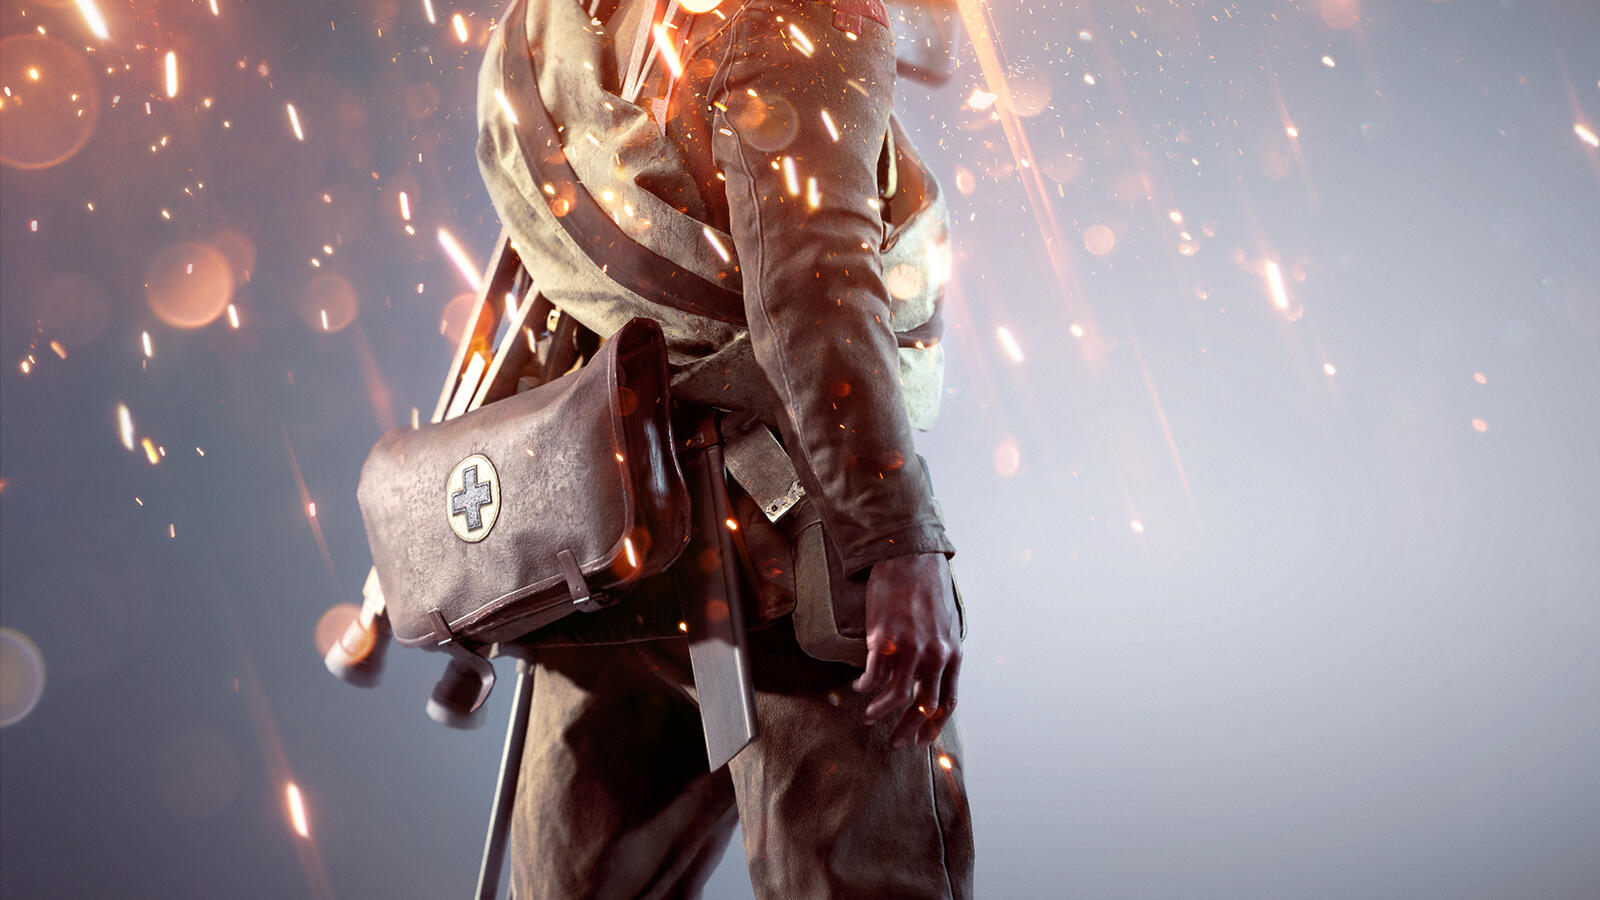 Wallpapers battlefield 1 first aid kit games on the desktop